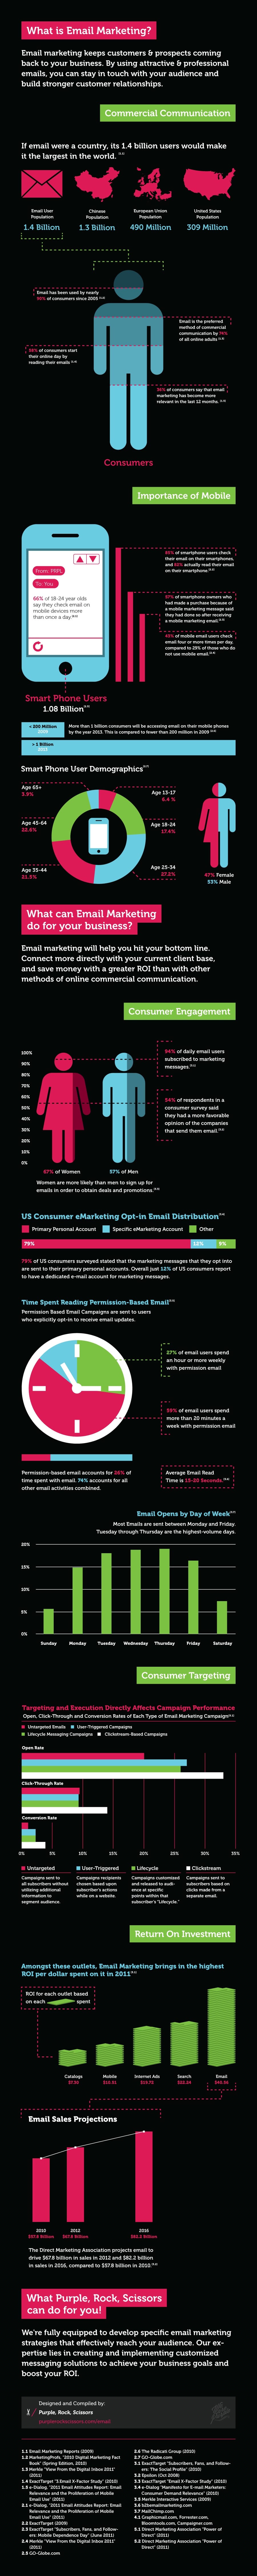 email-marketing-explained-in-infographic